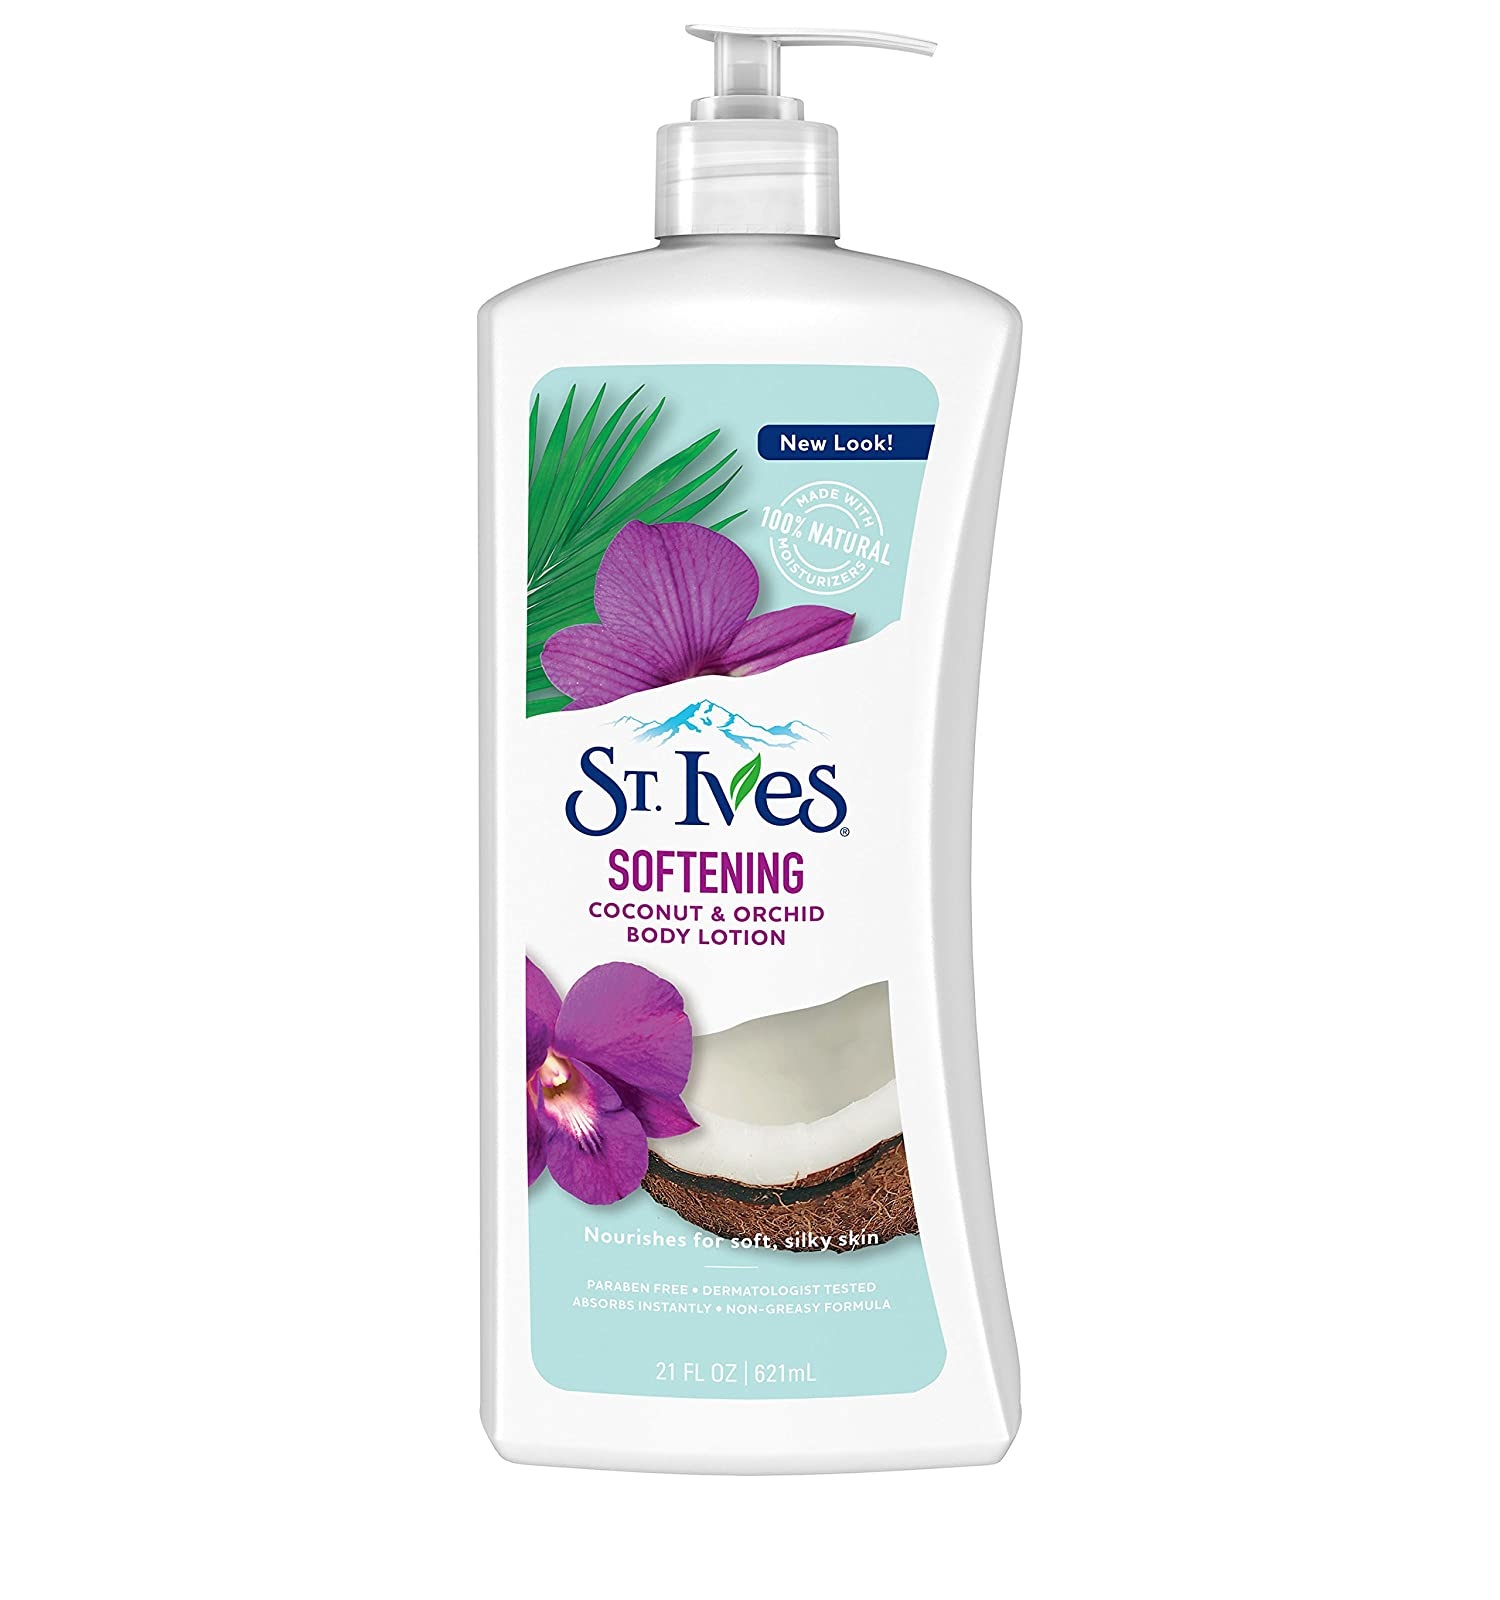 St Ives Softening Coconut and Orchid Body Lotion, 21 Oz - image 1 of 1